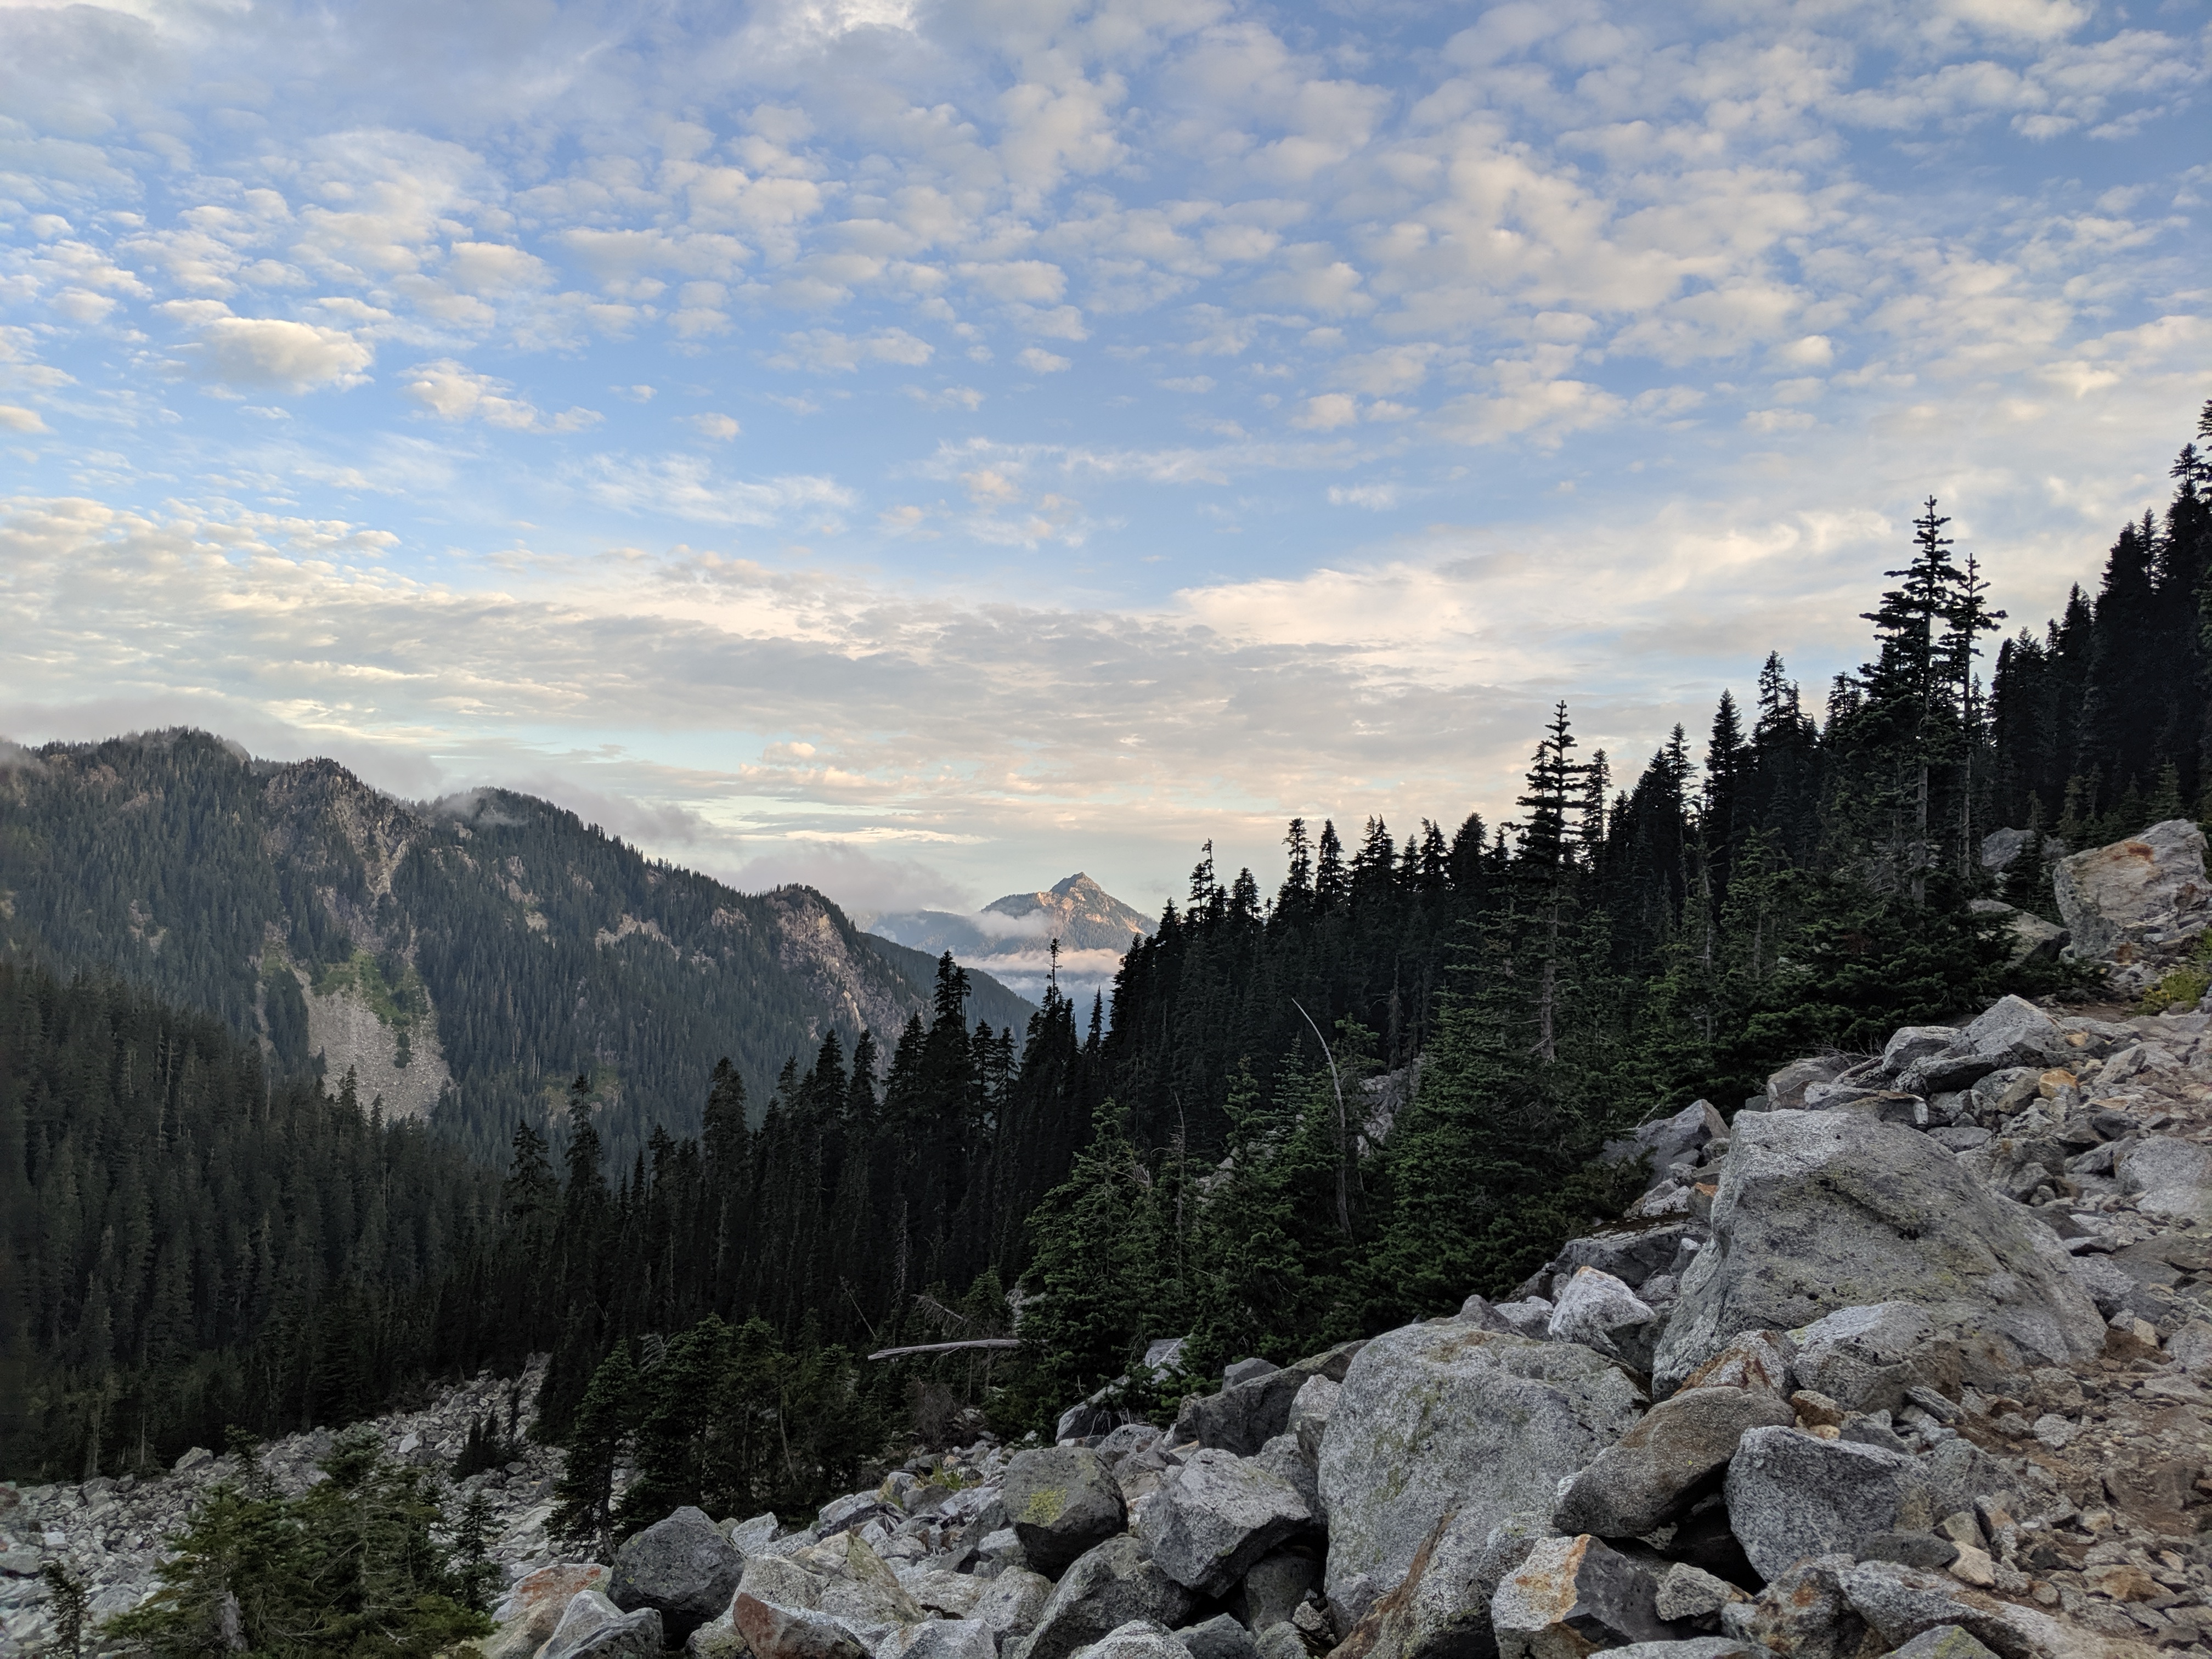 Day 113: Stevens Pass and Grizzly Peak